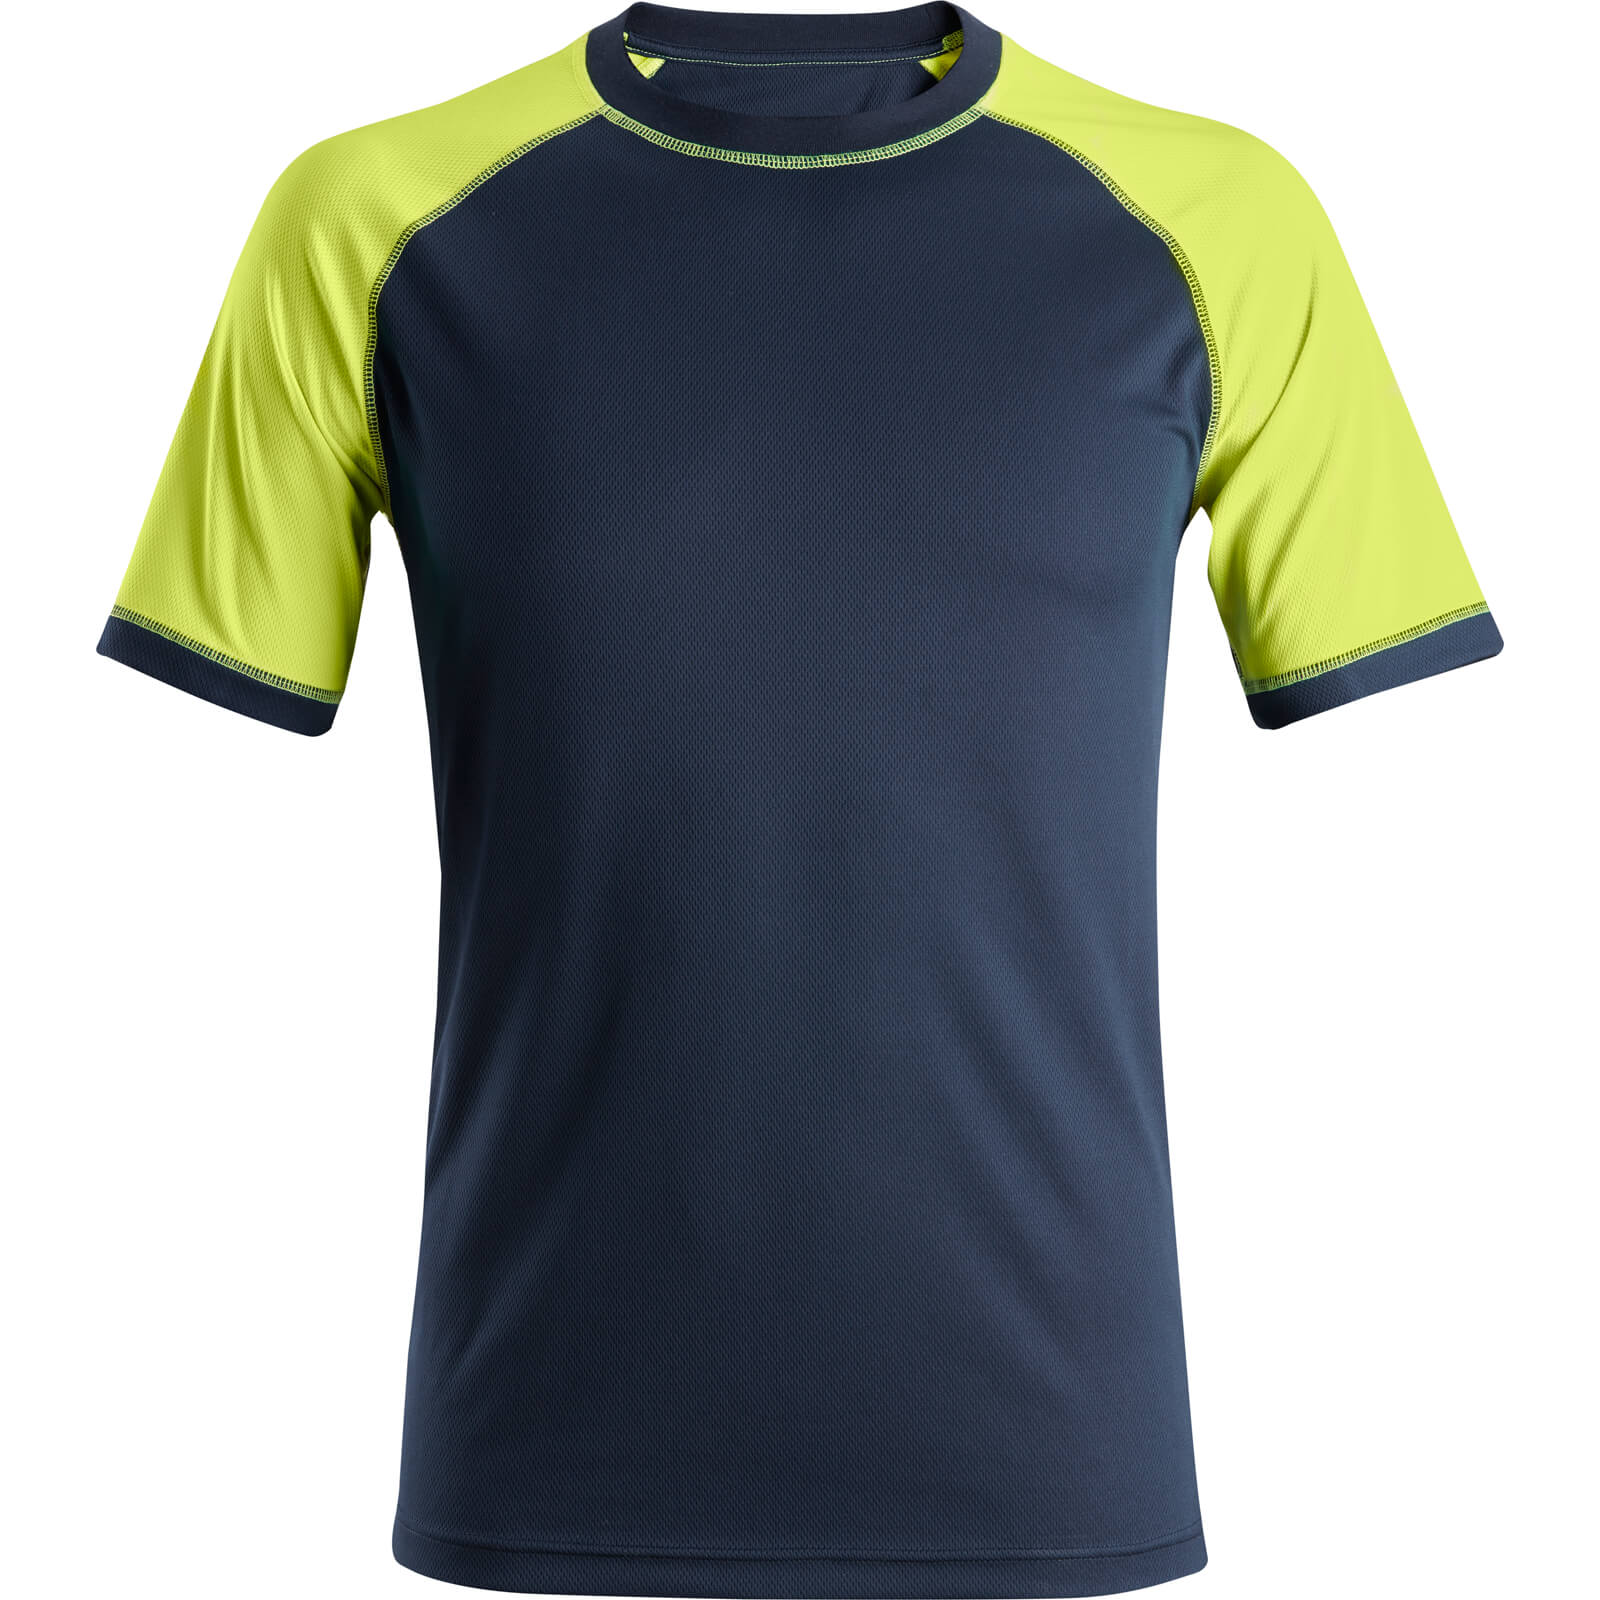 Image of Snickers 2505 Neon Short Sleeve T Shirt Navy S